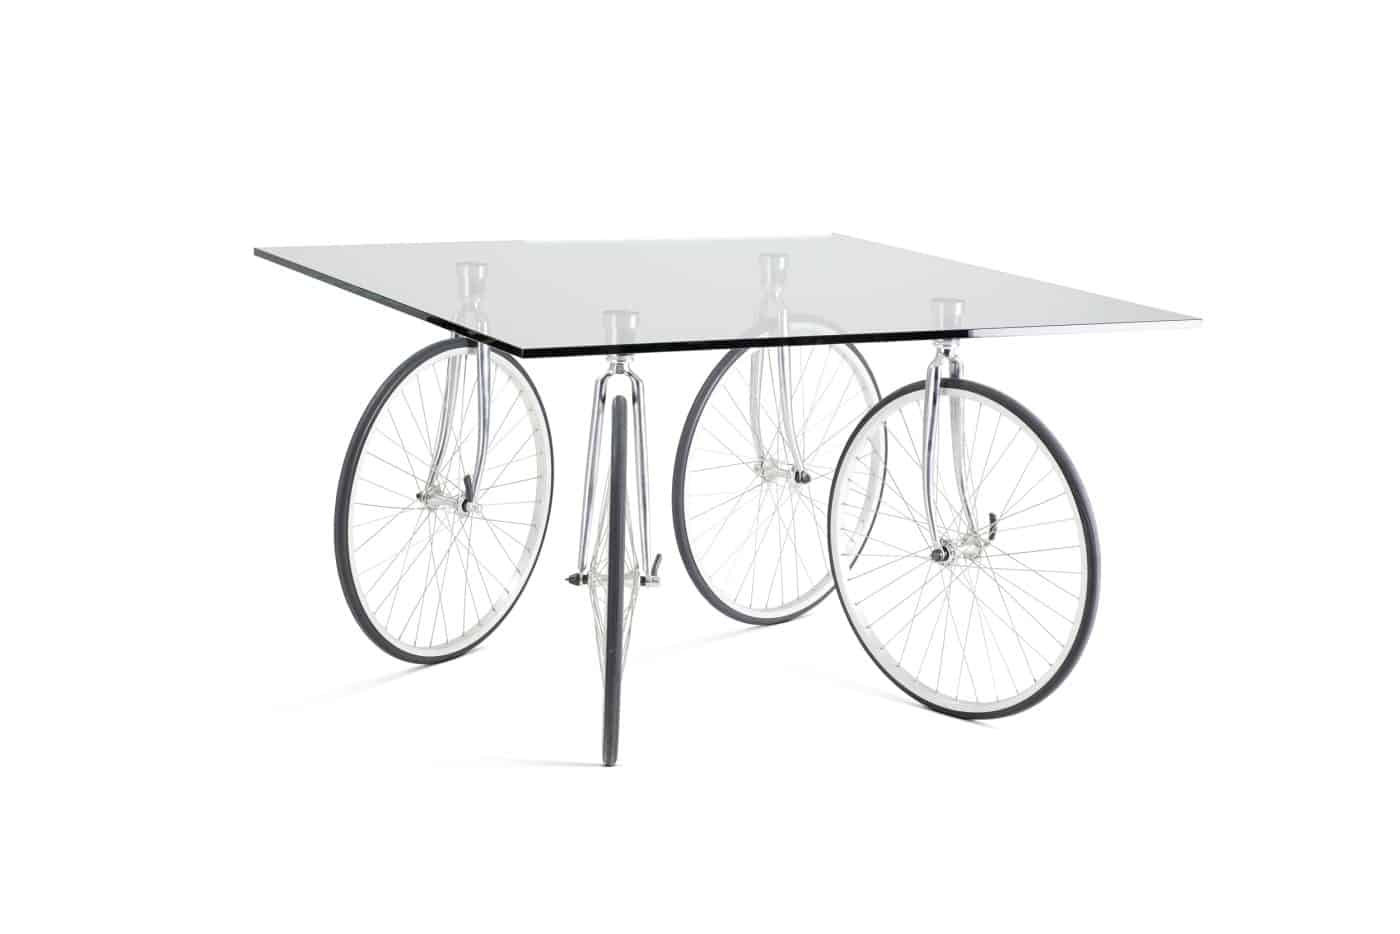 A glass-top table with bicycle wheels instead of legs